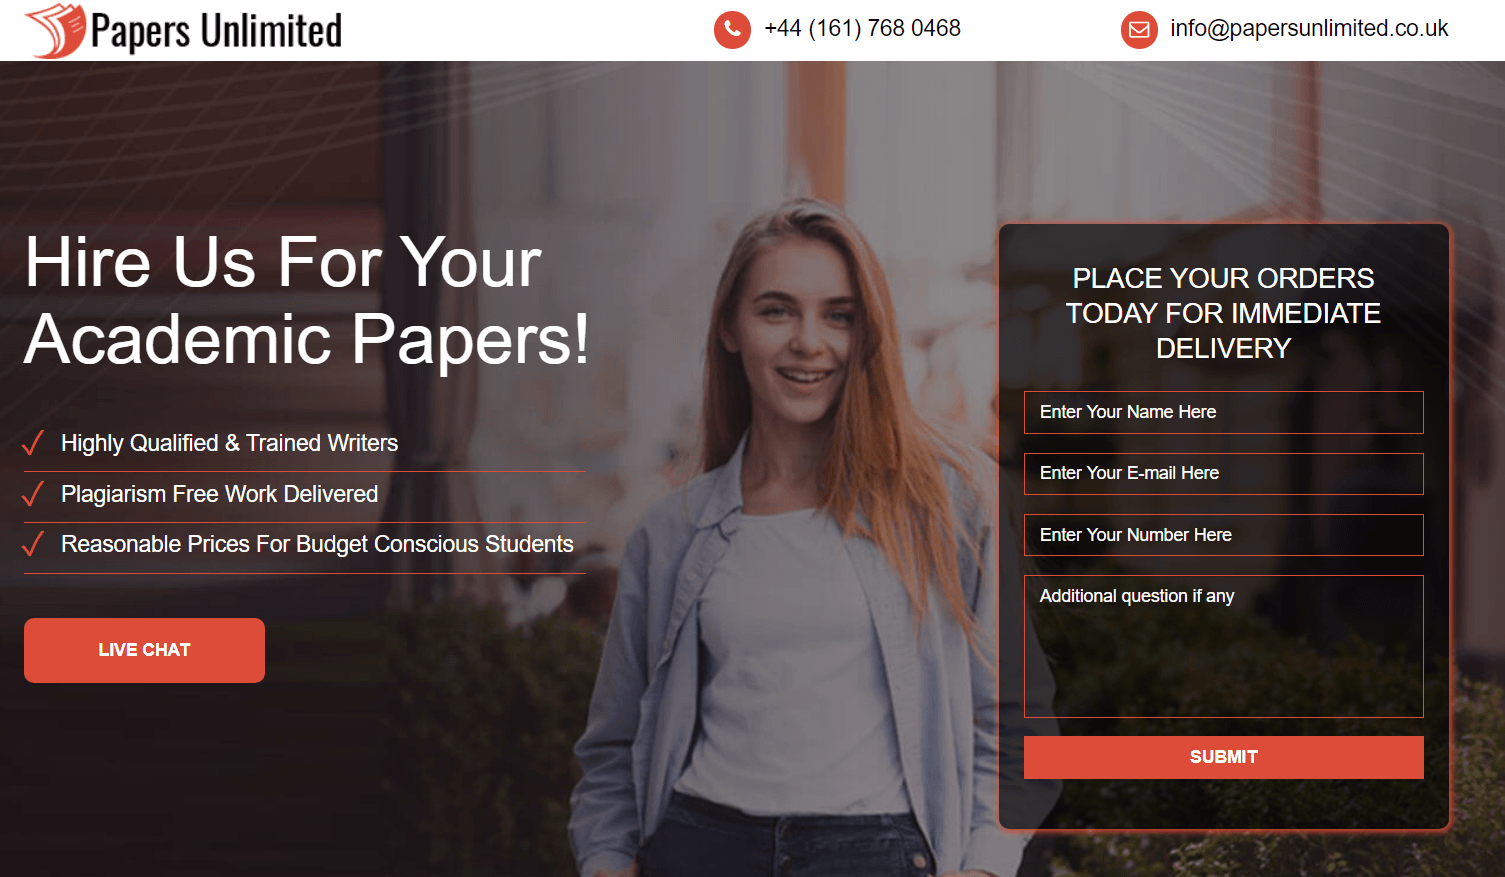 papersunlimited.co.uk